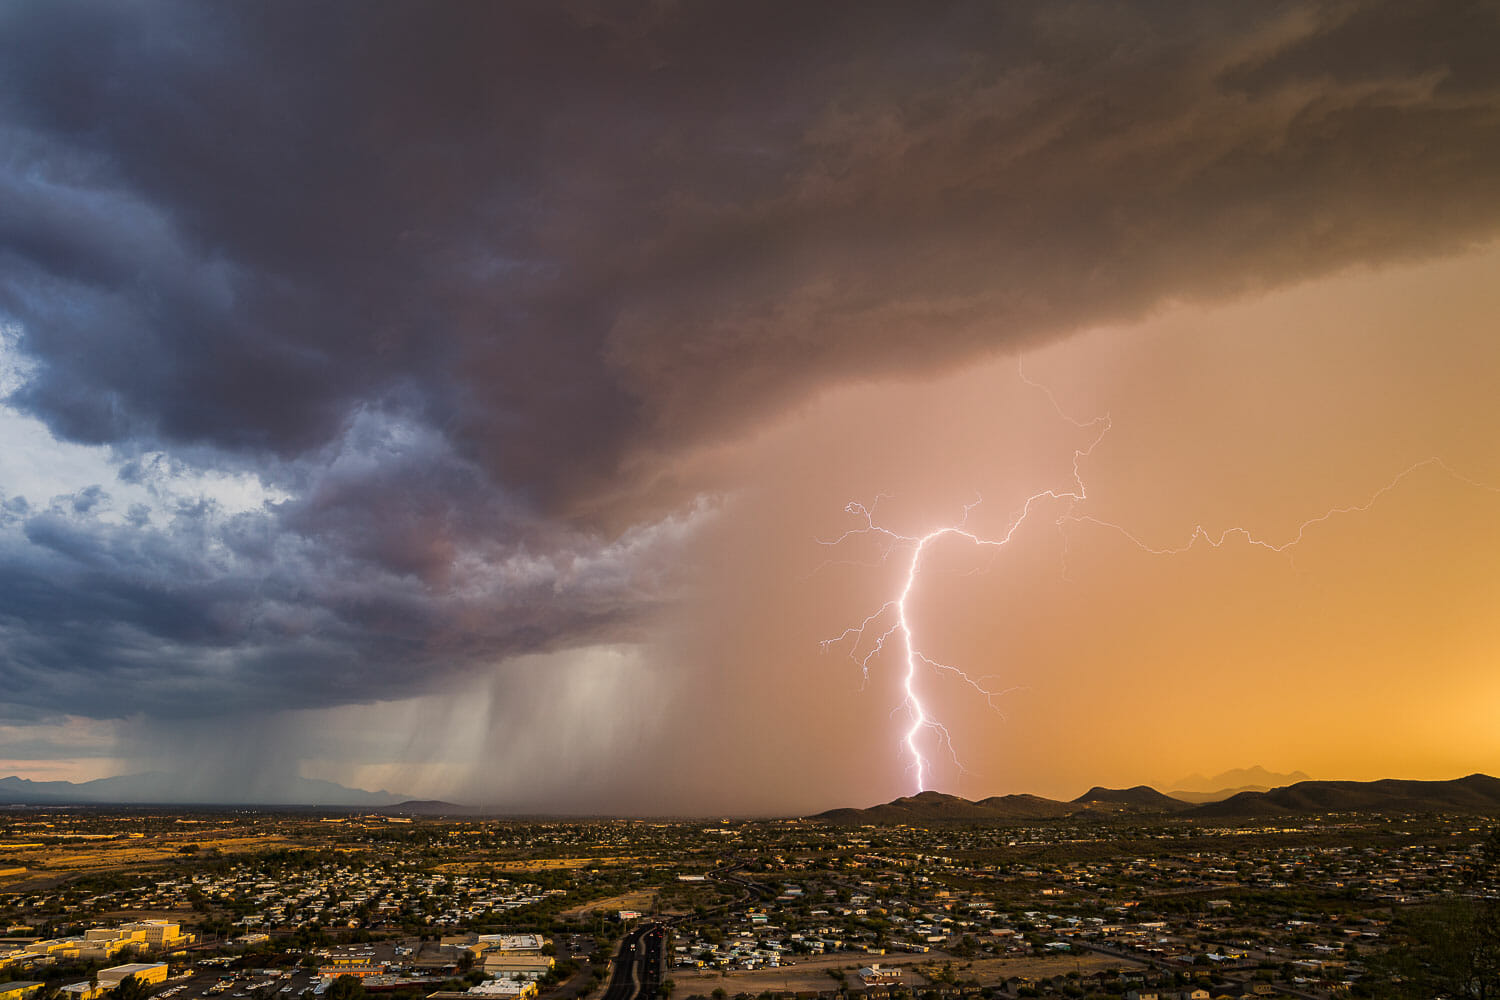 Lightning strike beneath storm clouds over a cityscape at sunset.